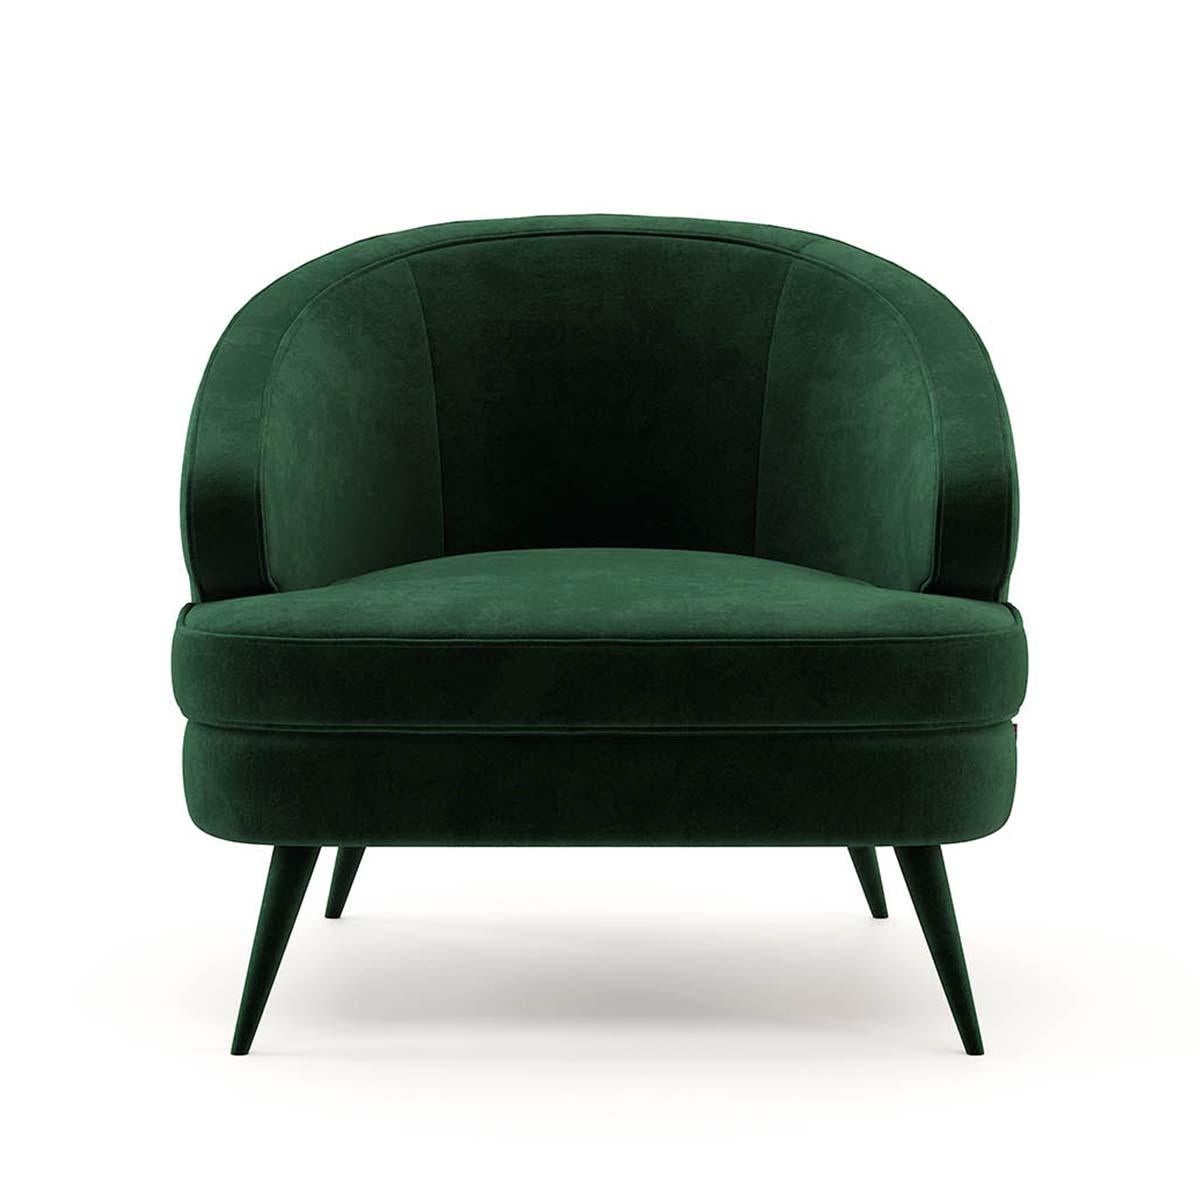 Armchair Peter with solid wood structure,
upholstered and covered with British green
velvet fabric, with black oak feet.
Also available with other fabric finishes on request.